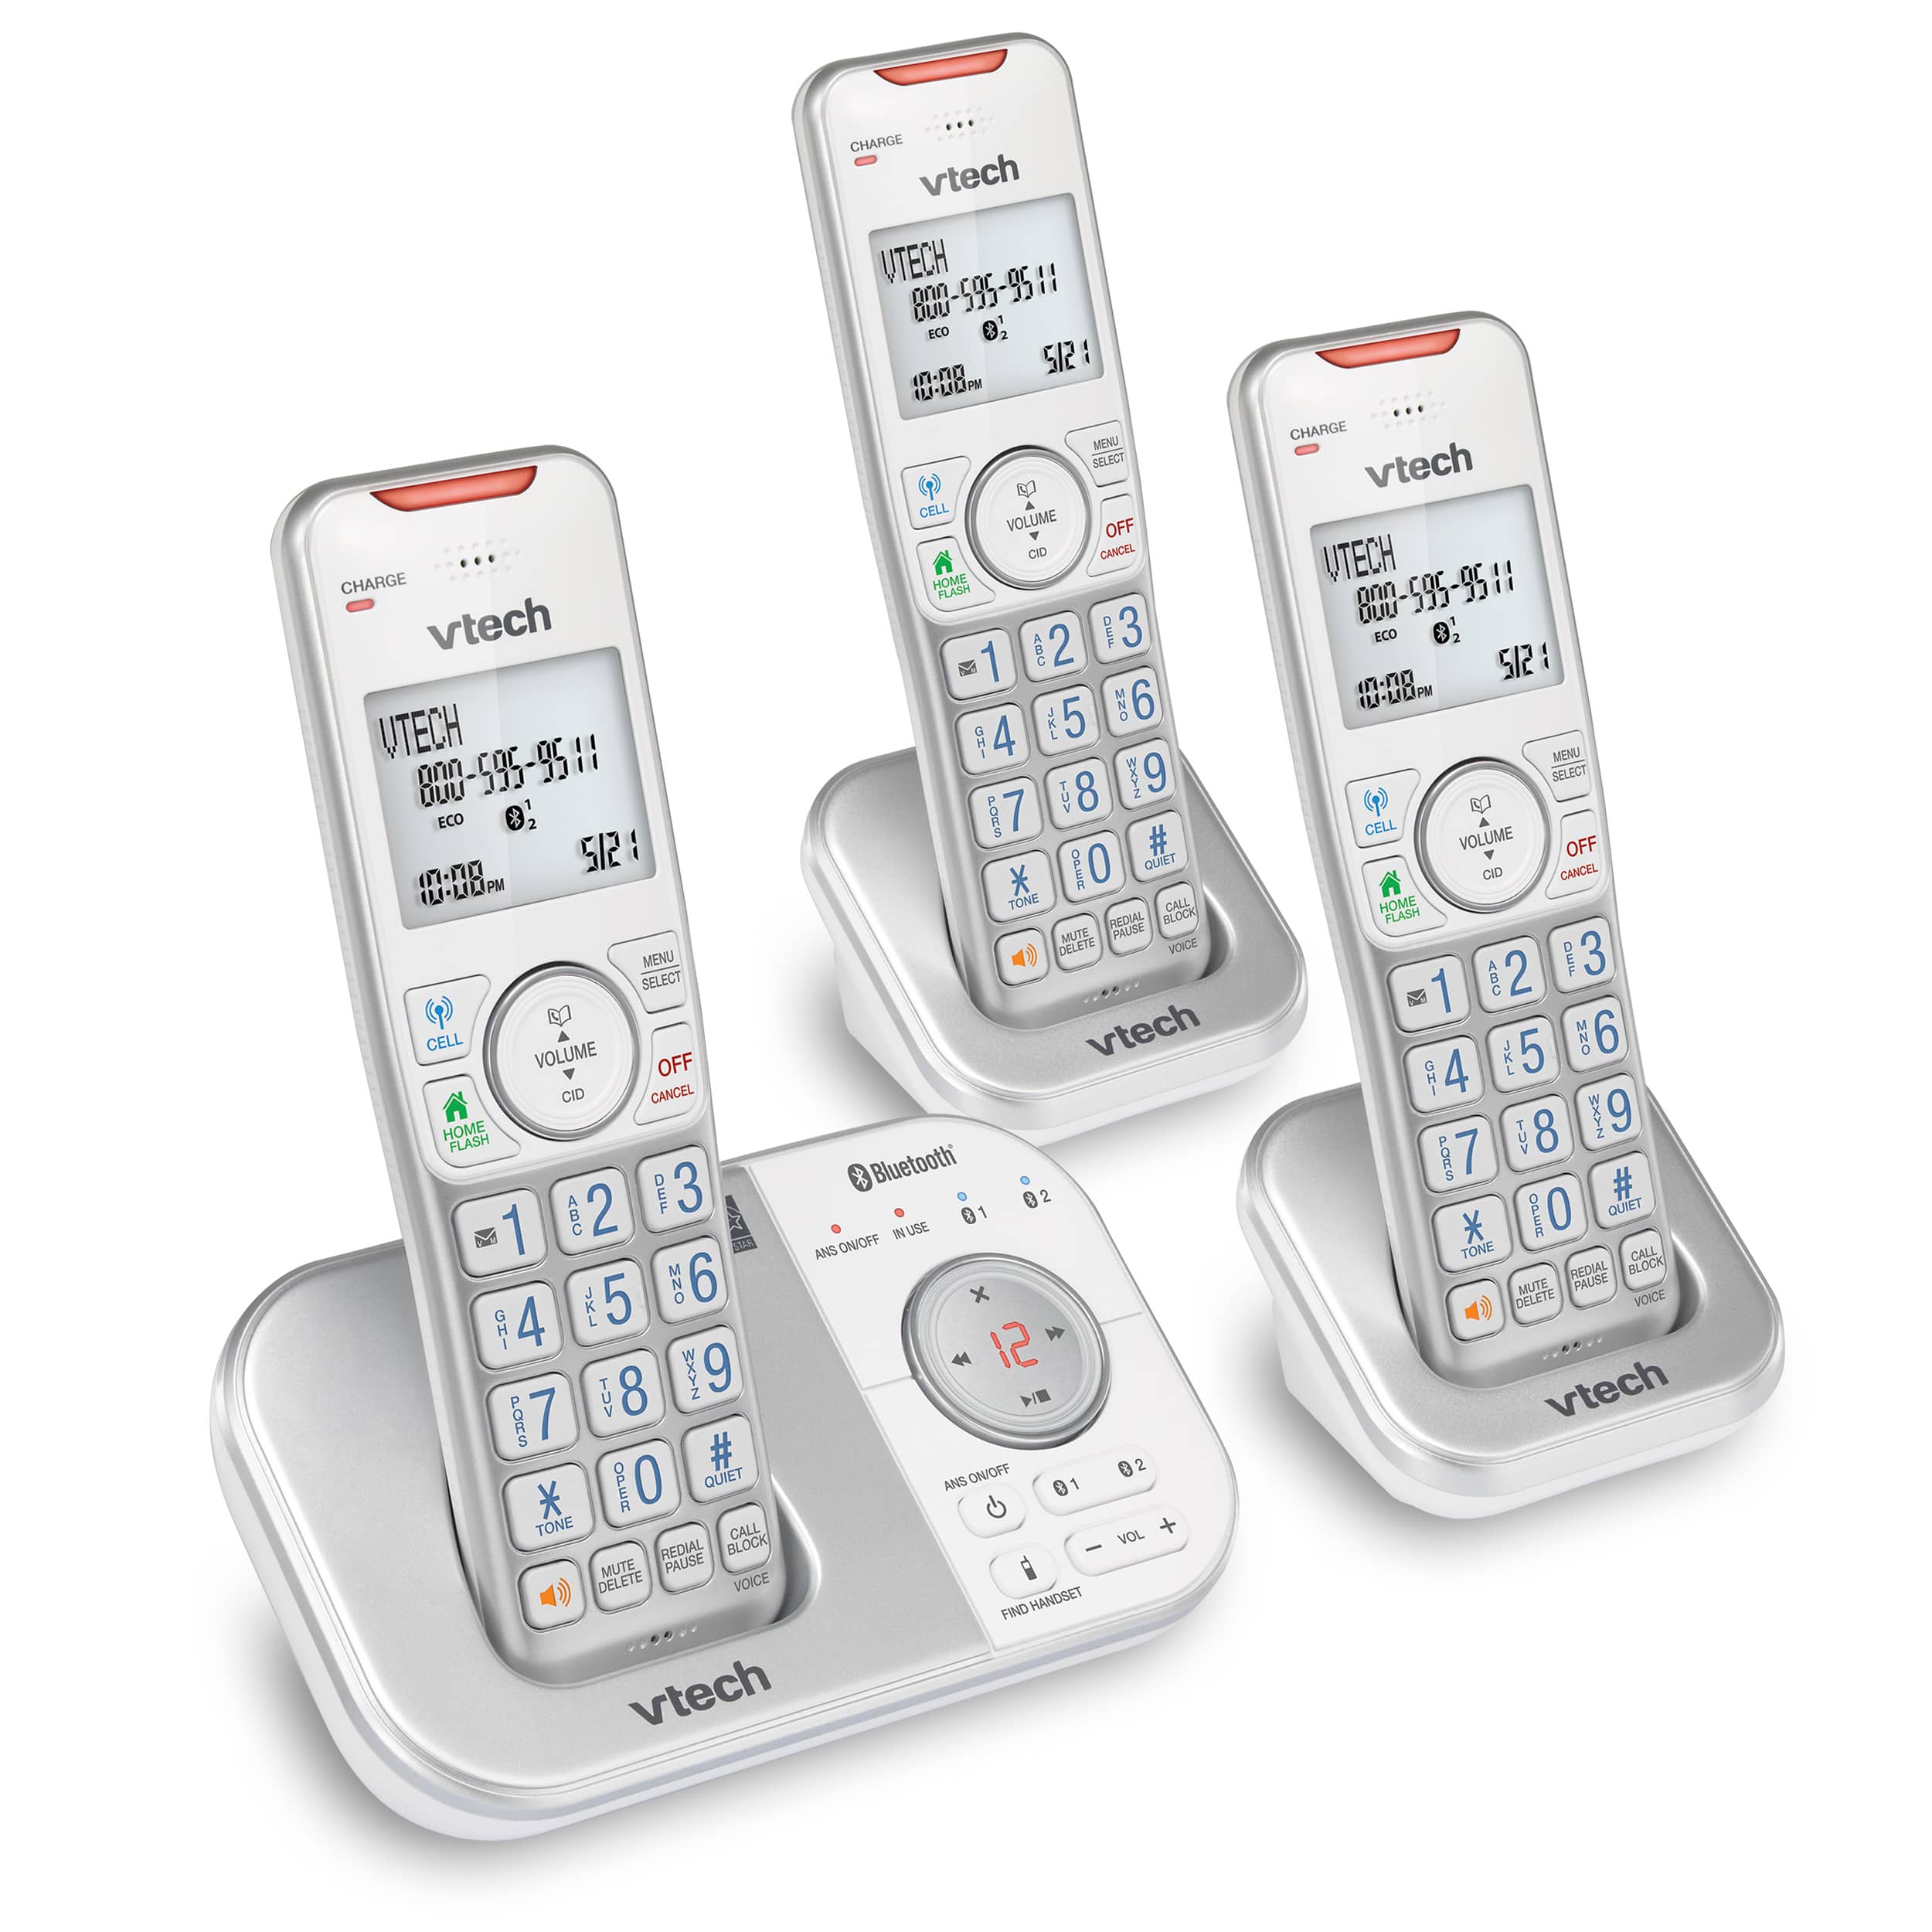 3-Handset Expandable Cordless Phone with Bluetooth Connect to Cell, Smart Call Blocker and Answering System (Silver & White) - view 3